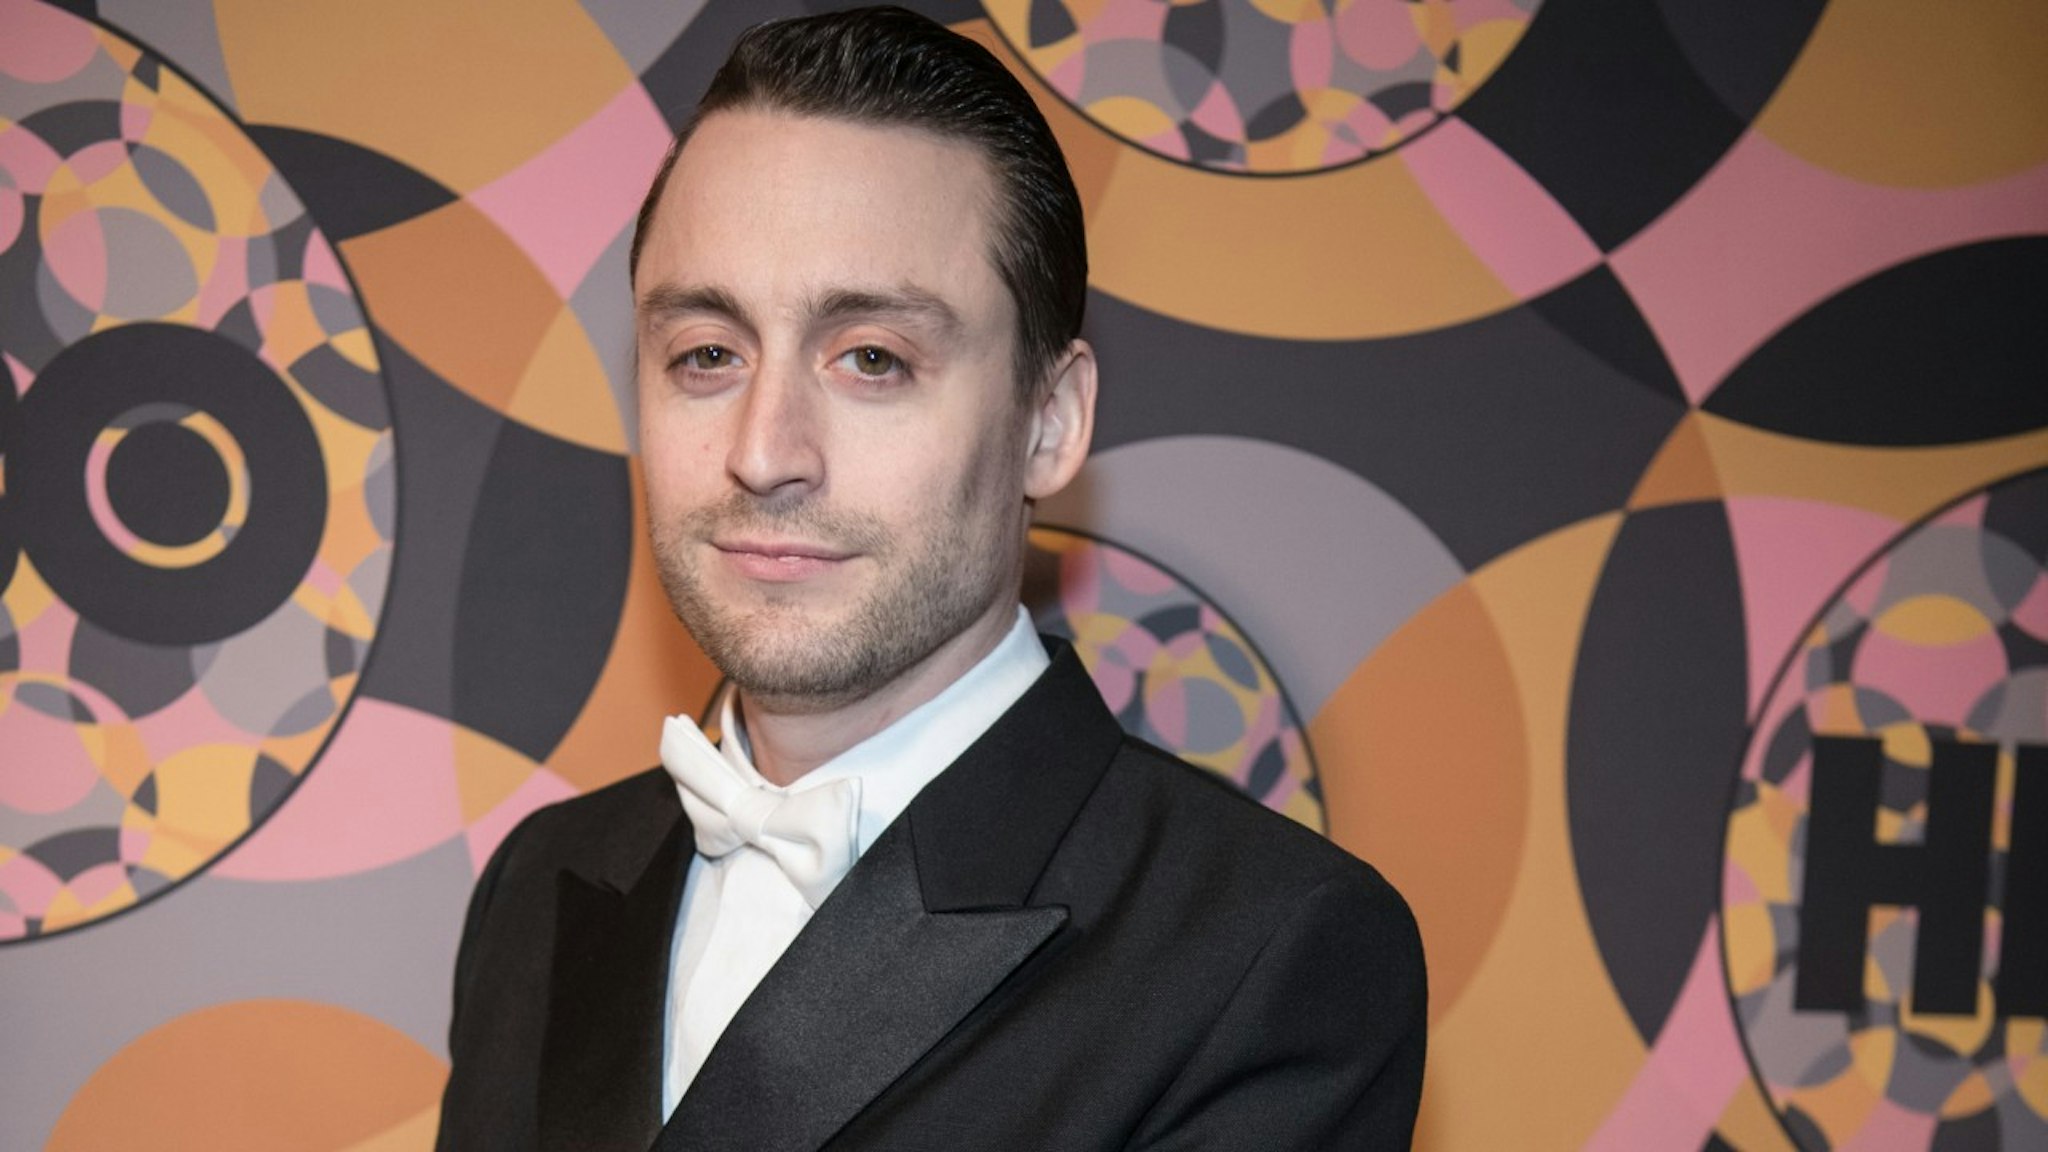 Kieran Culkin arrives at HBO's Official Golden Globes After Party at Circa 55 Restaurant on January 05, 2020 in Los Angeles, California.